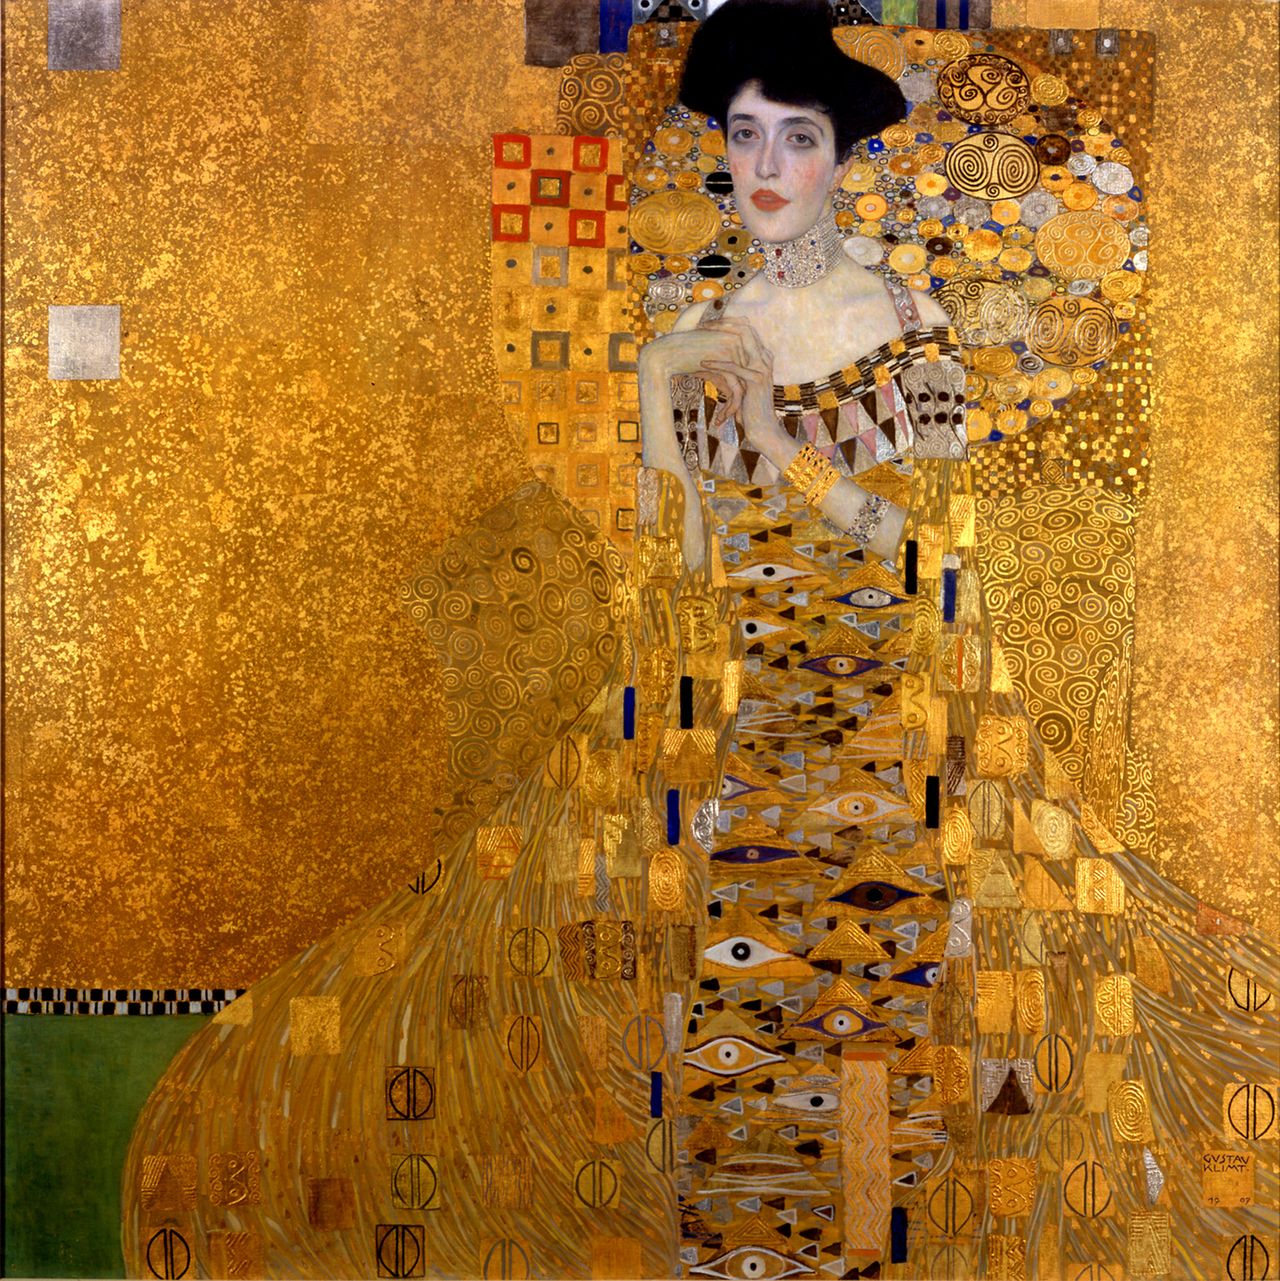 "Adele Bloch-Bauer I," 1907. Found in the collection of the Neue Galerie New York.